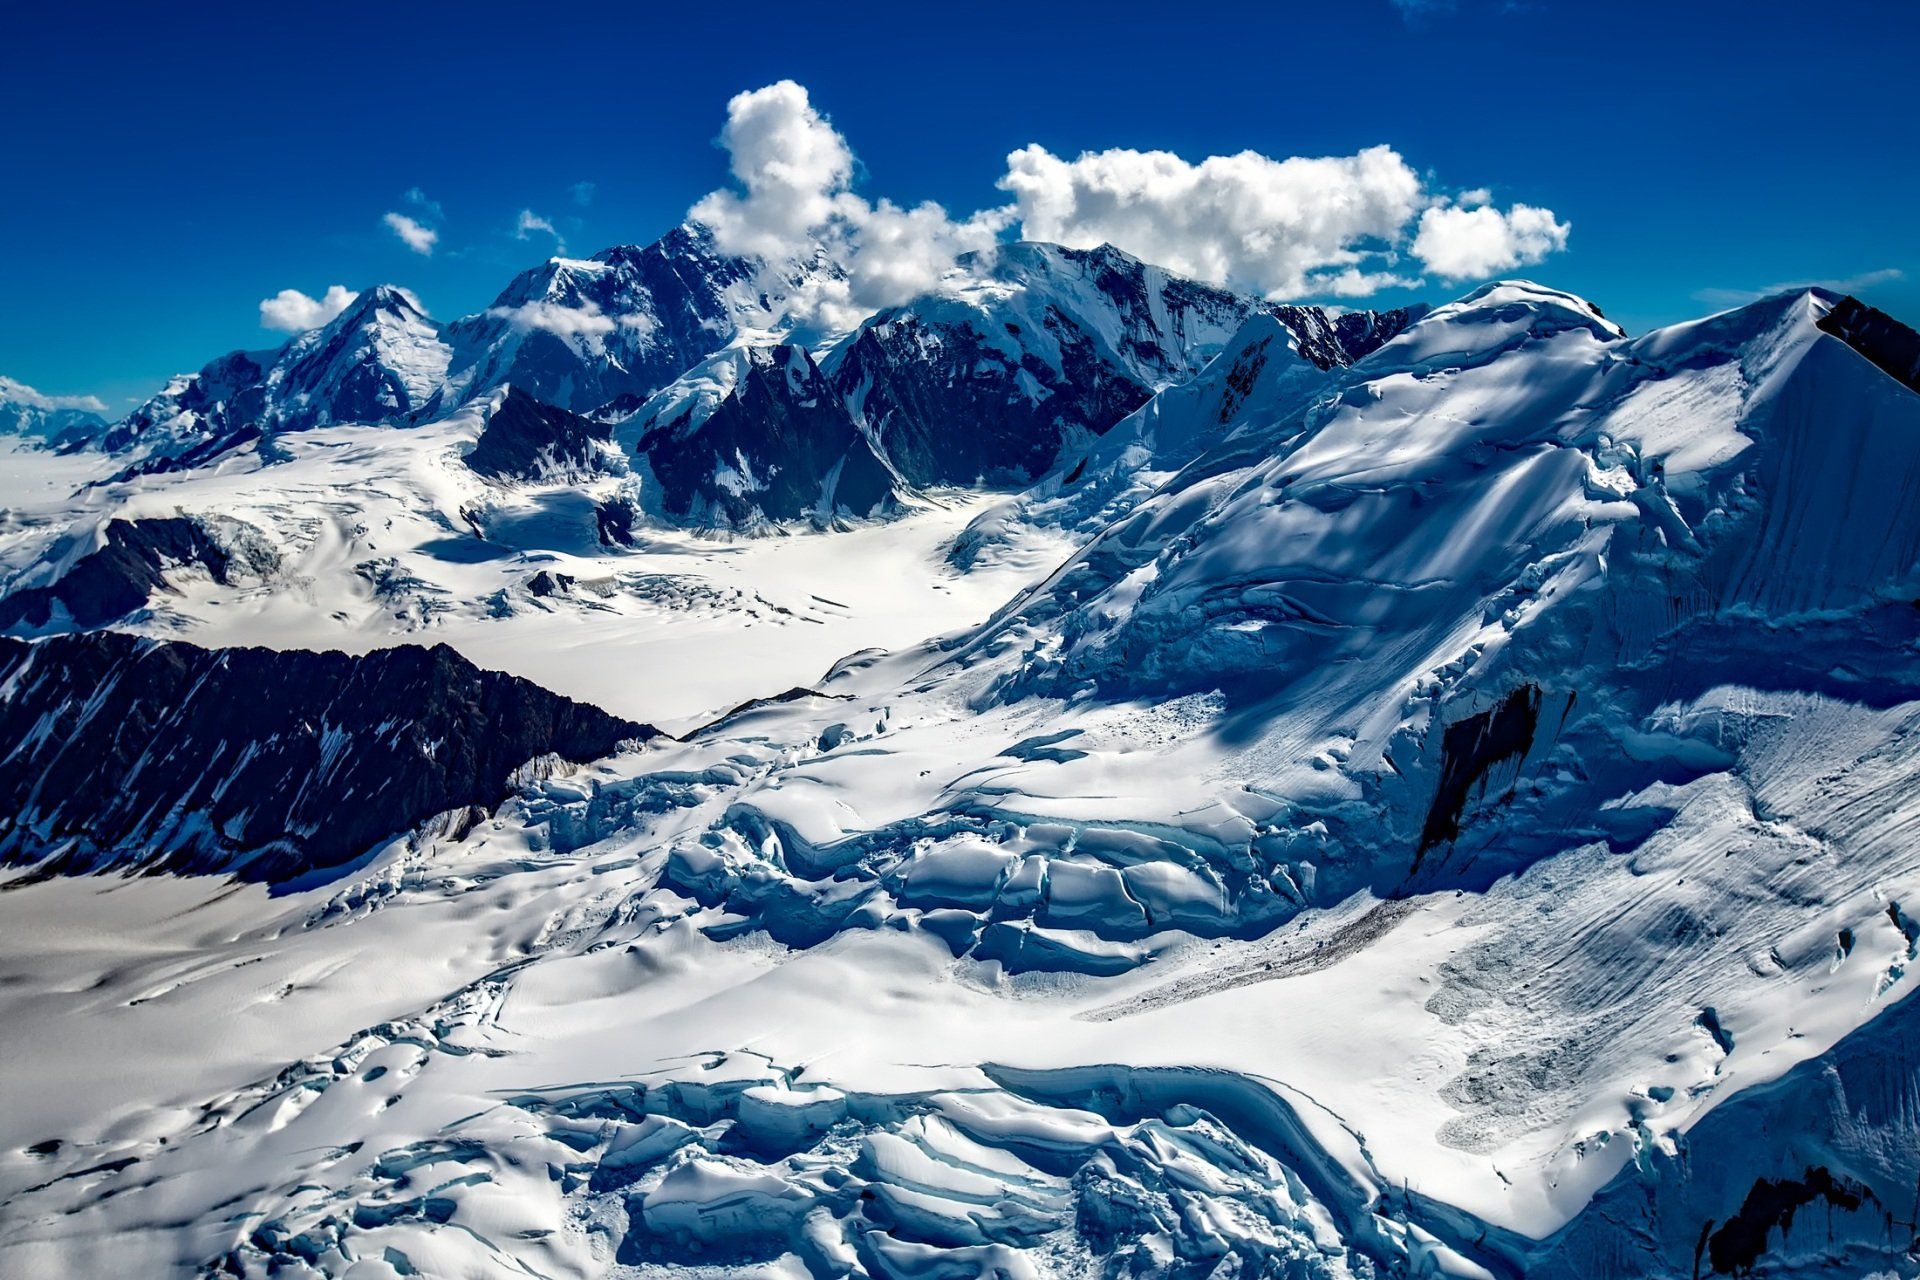 a snowy mountain with a blue sky in the background